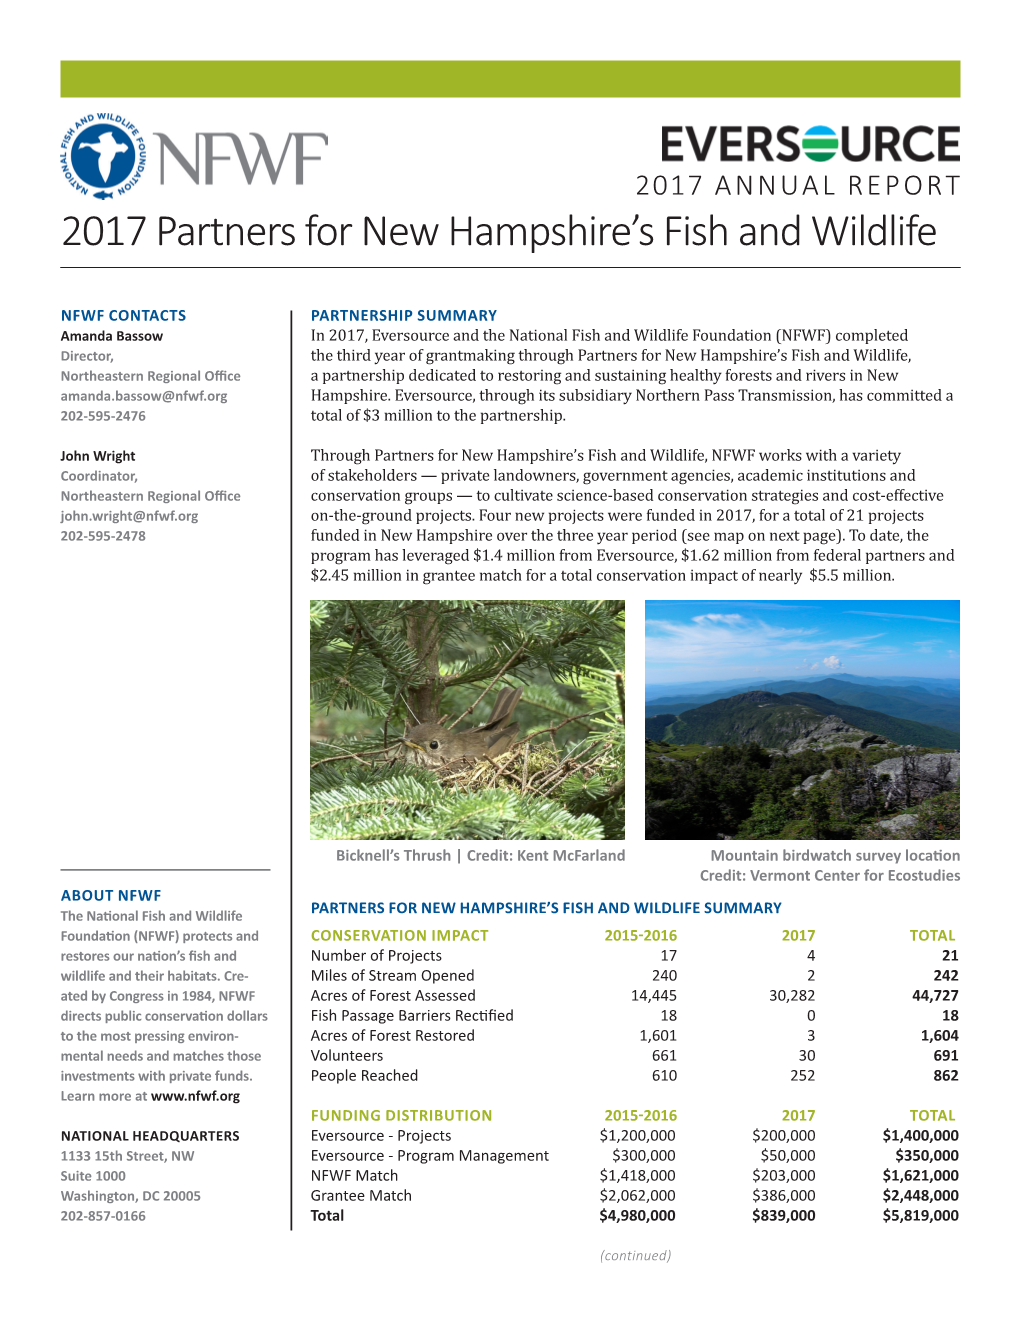 2017 Partners for New Hampshire's Fish and Wildlife